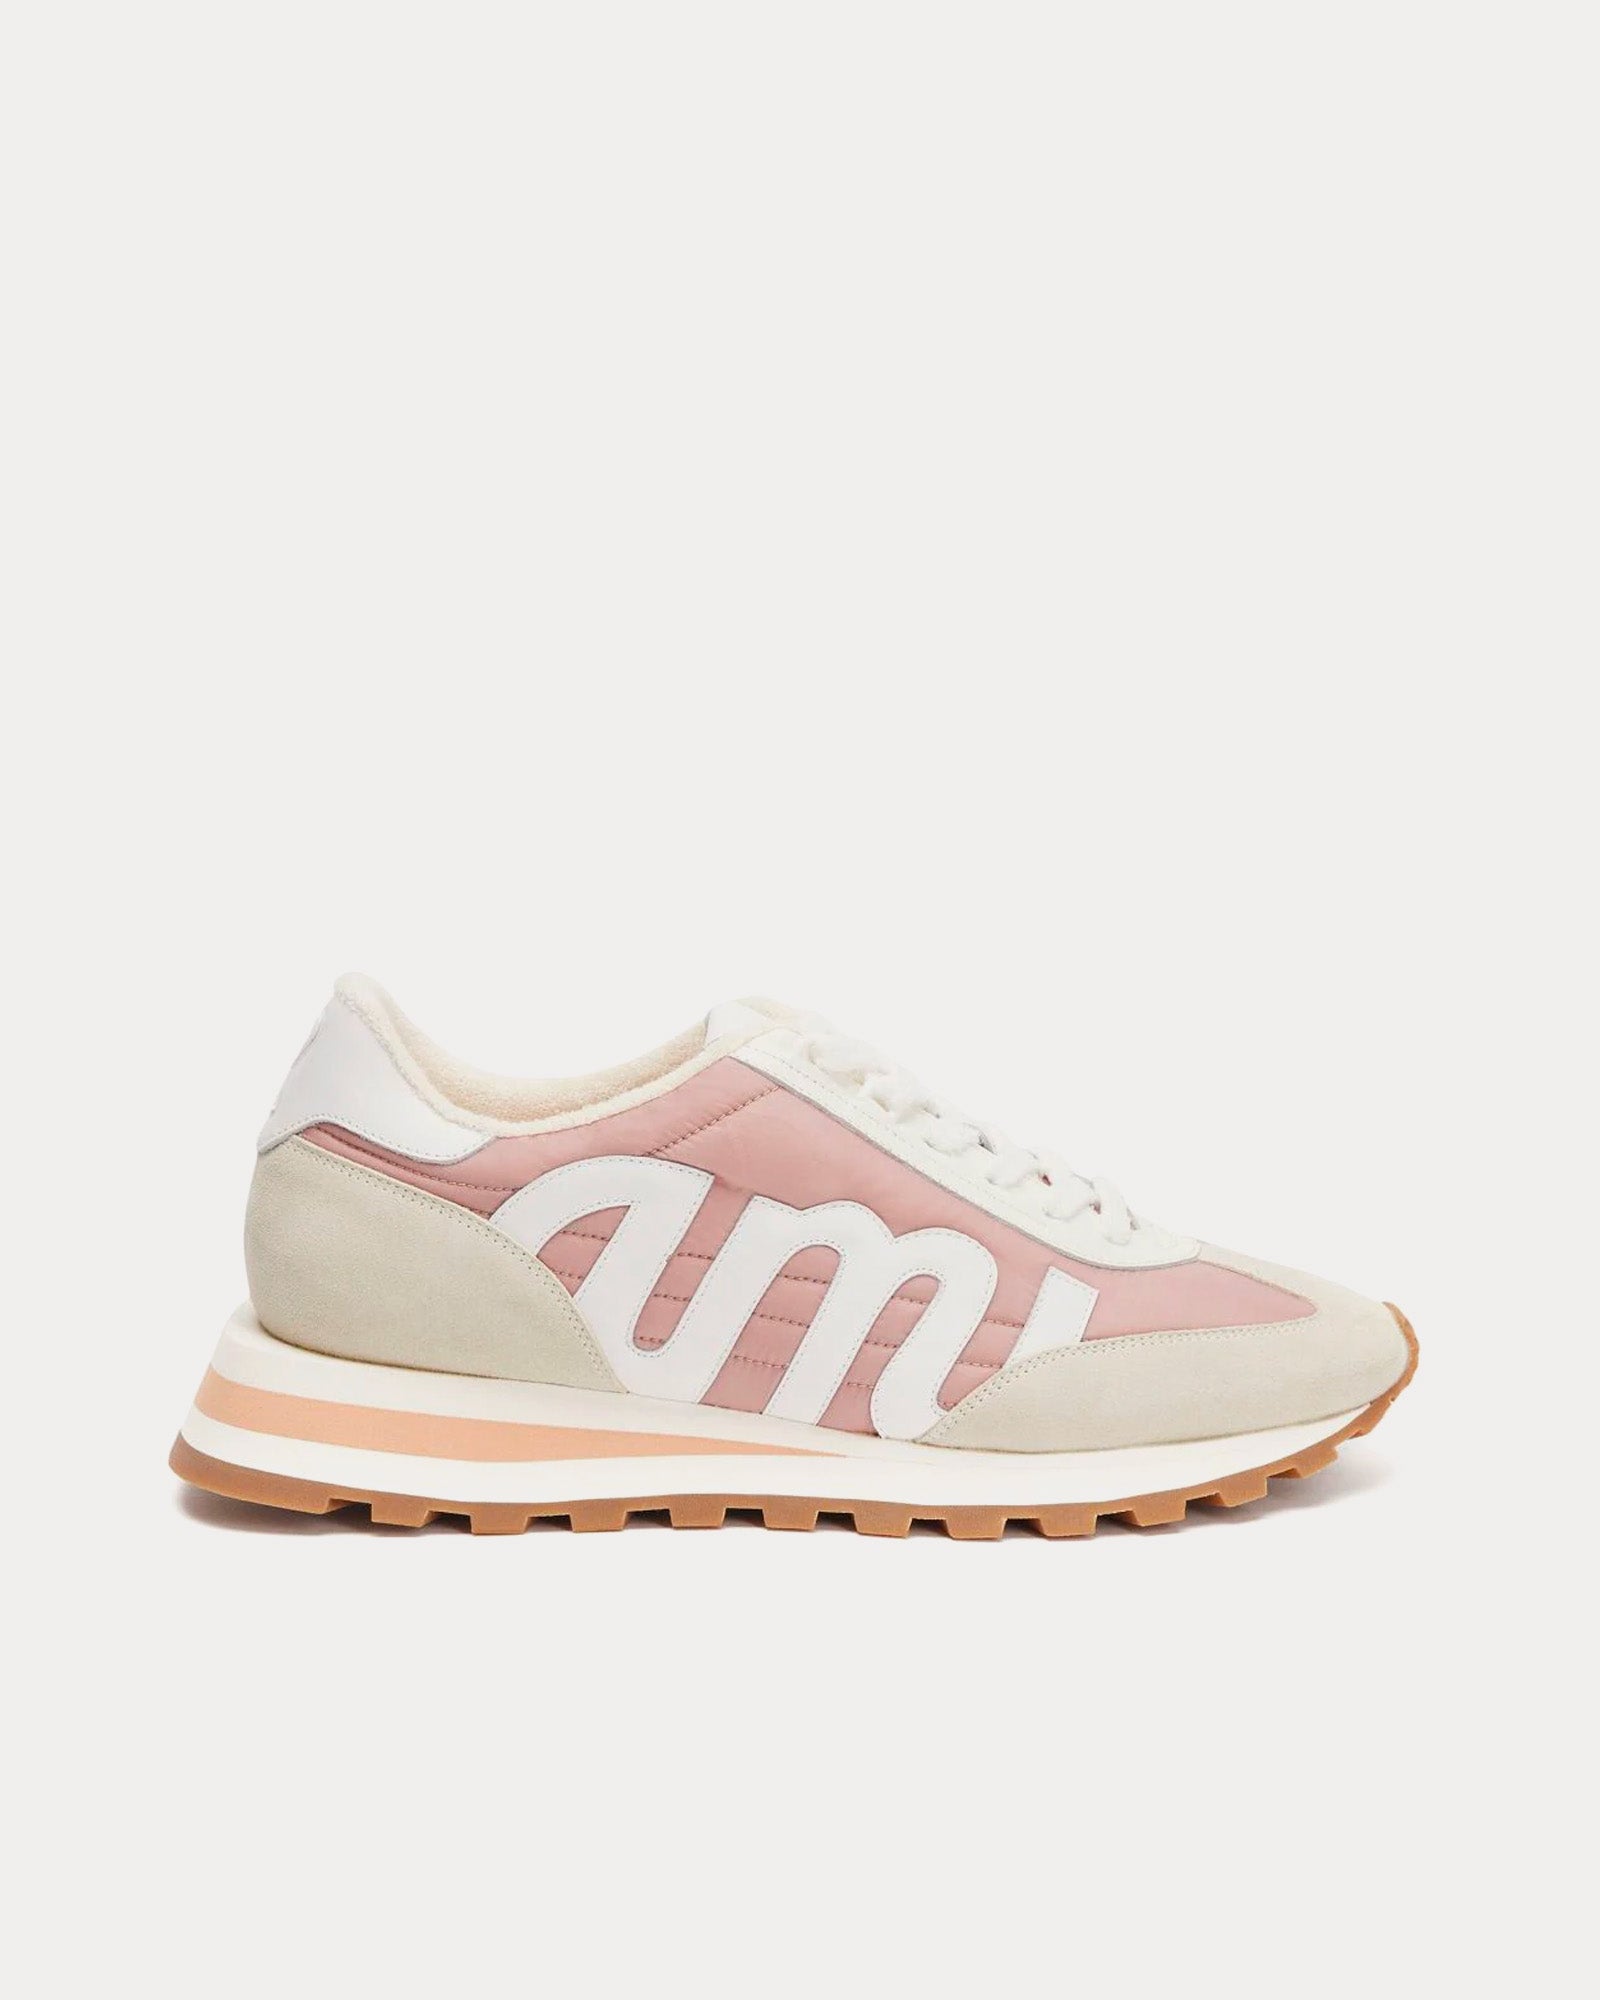 AMI - Ami Rush Pink / Light Beige Low Top Sneakers